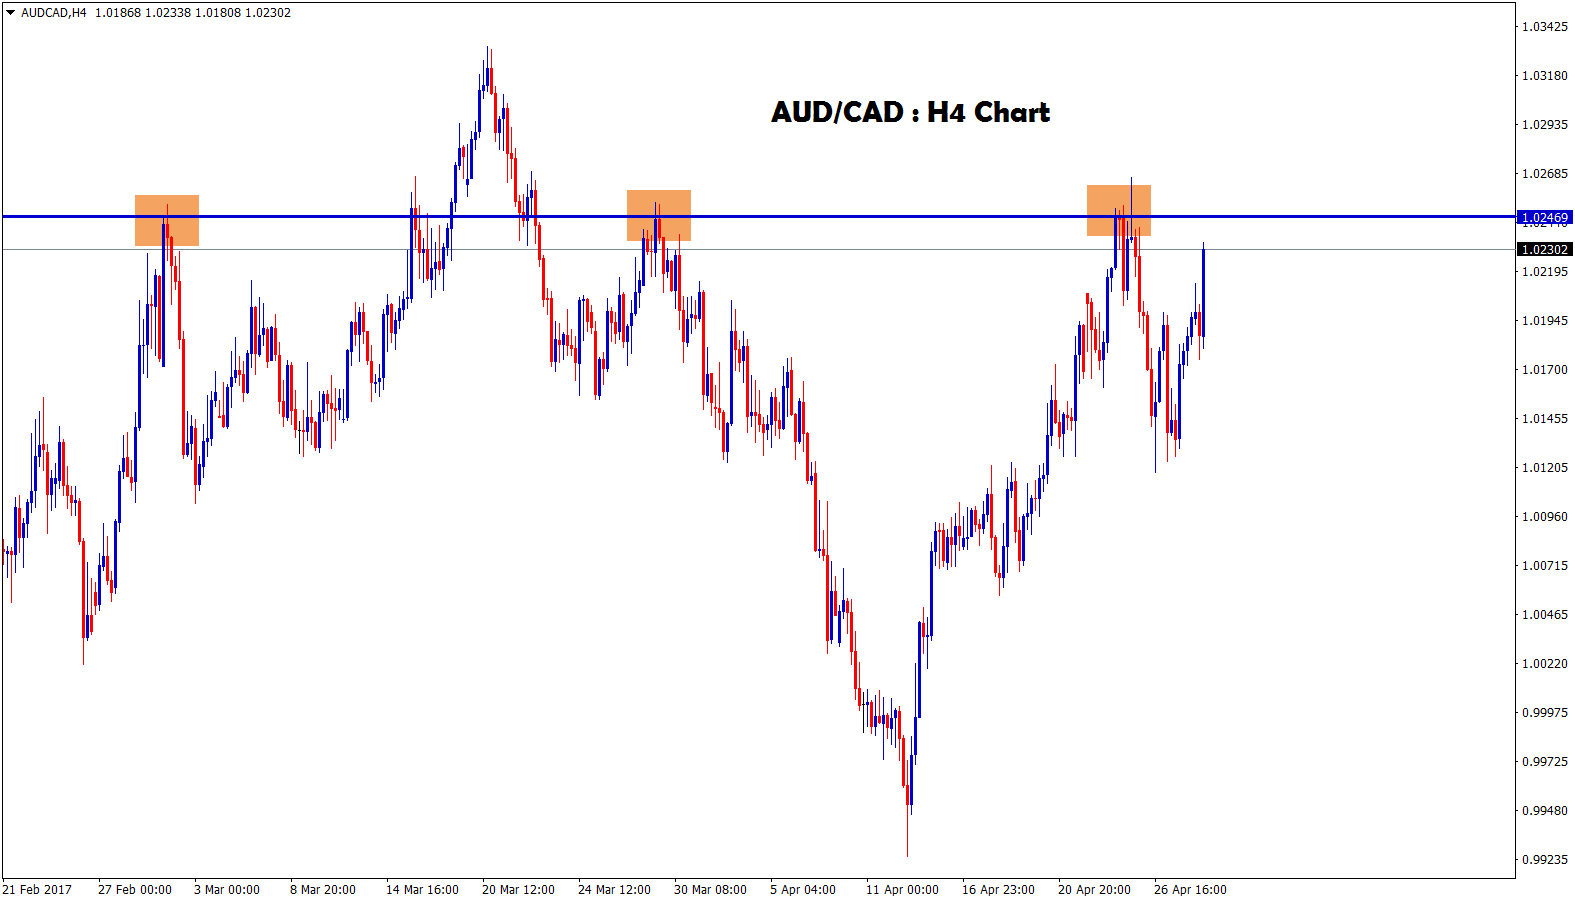 audcad minor level in h4 chart